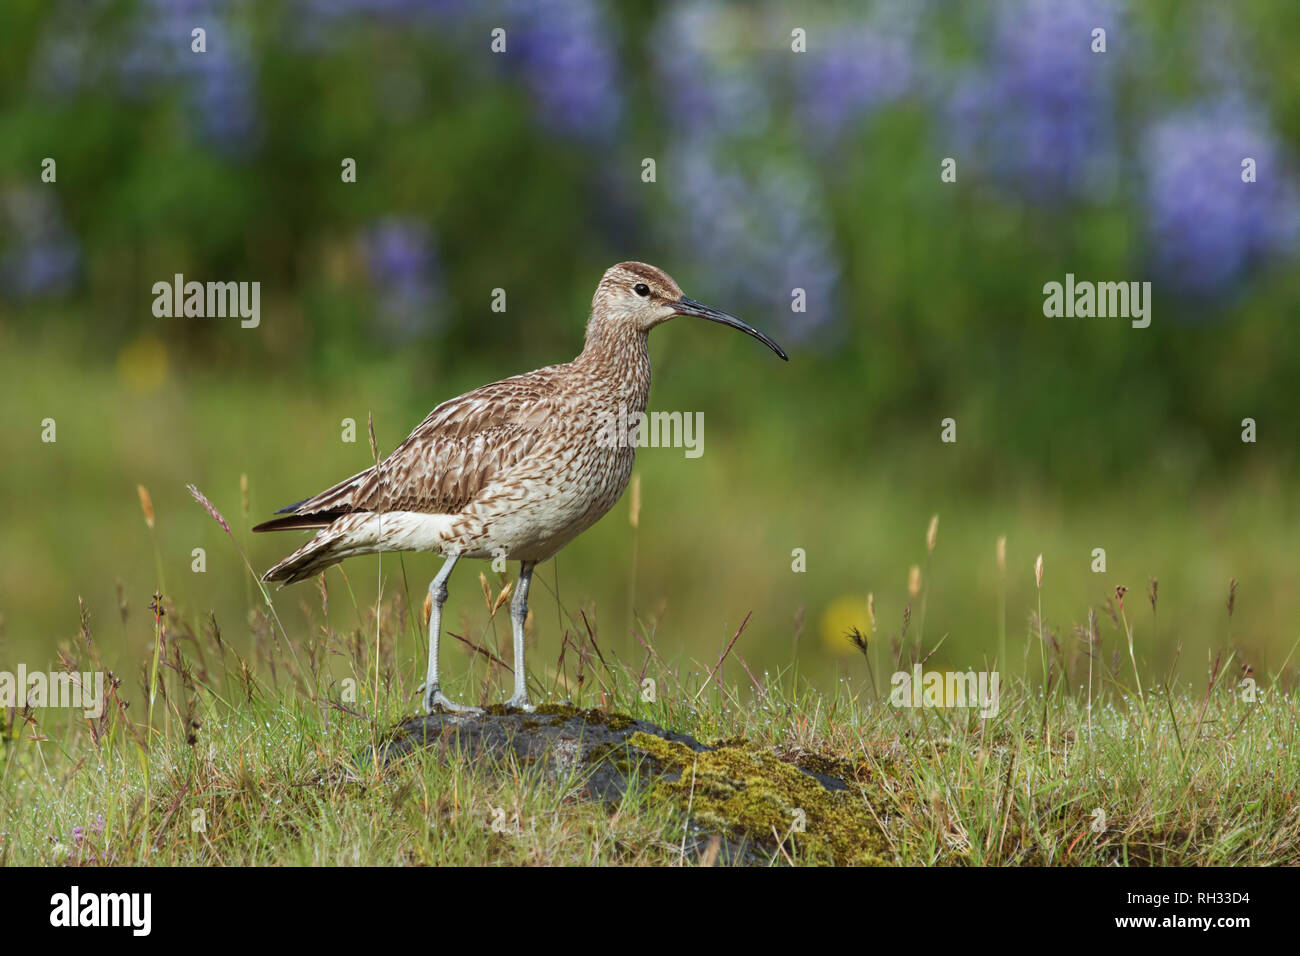 Whimbrel standing on a rock with blurred with blurred violet flowers in Iceland. Stock Photo